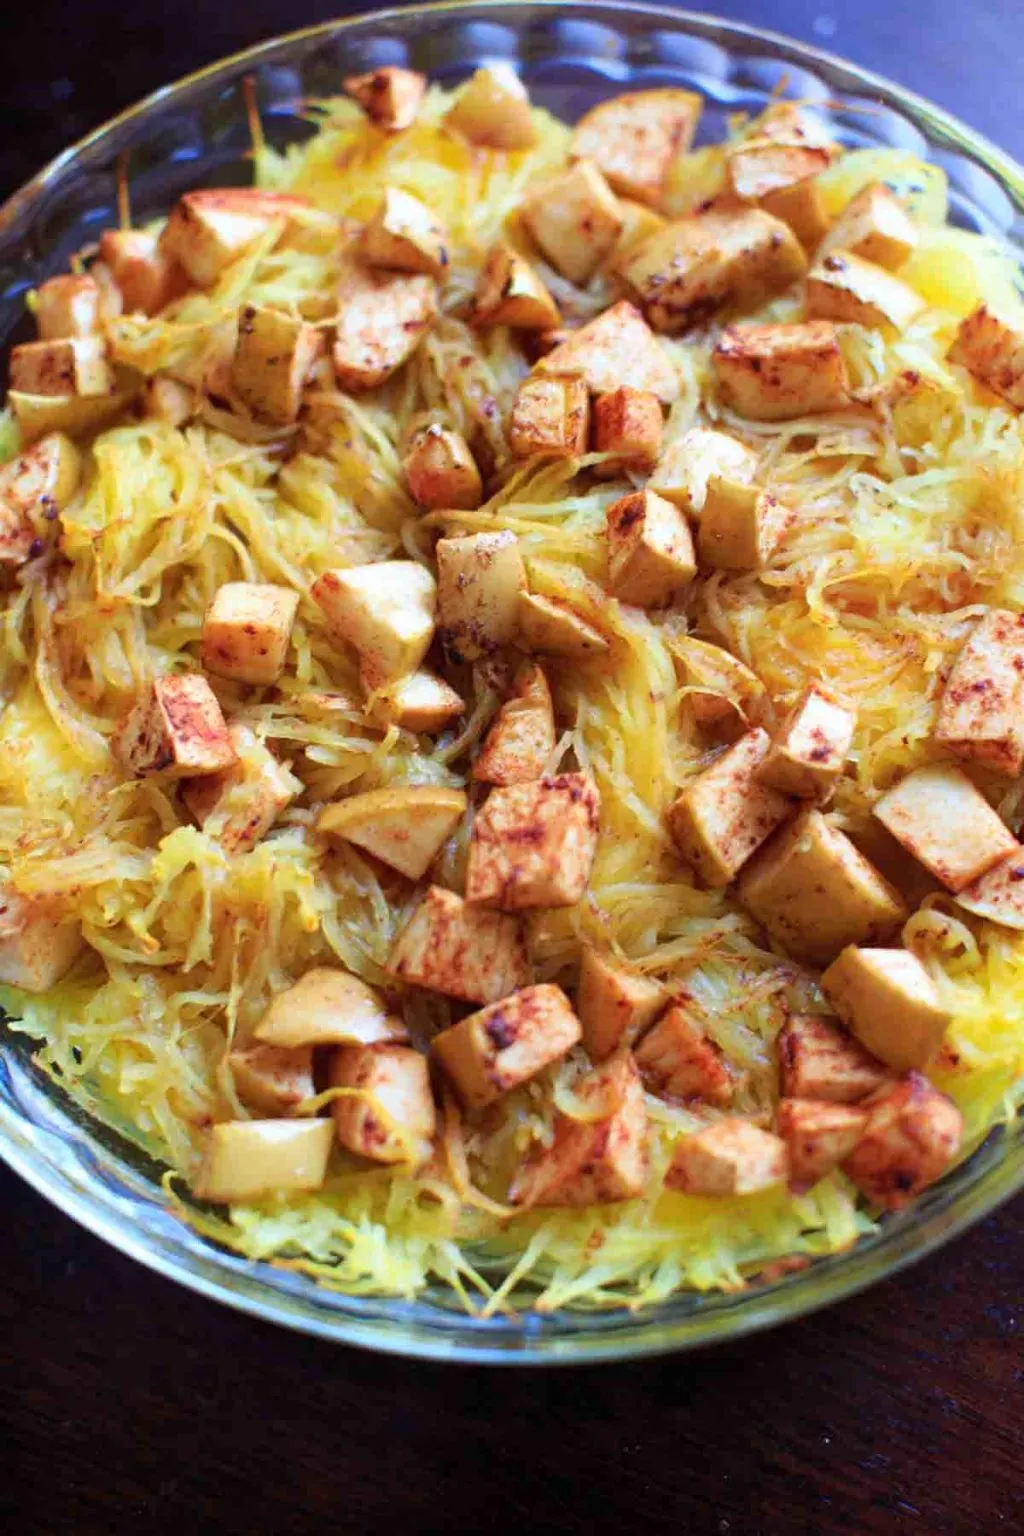 Maple Apple Spaghetti Squash Bake - a vegan friendly, gluten free veggie side dish that is great for family dinners and holidays.